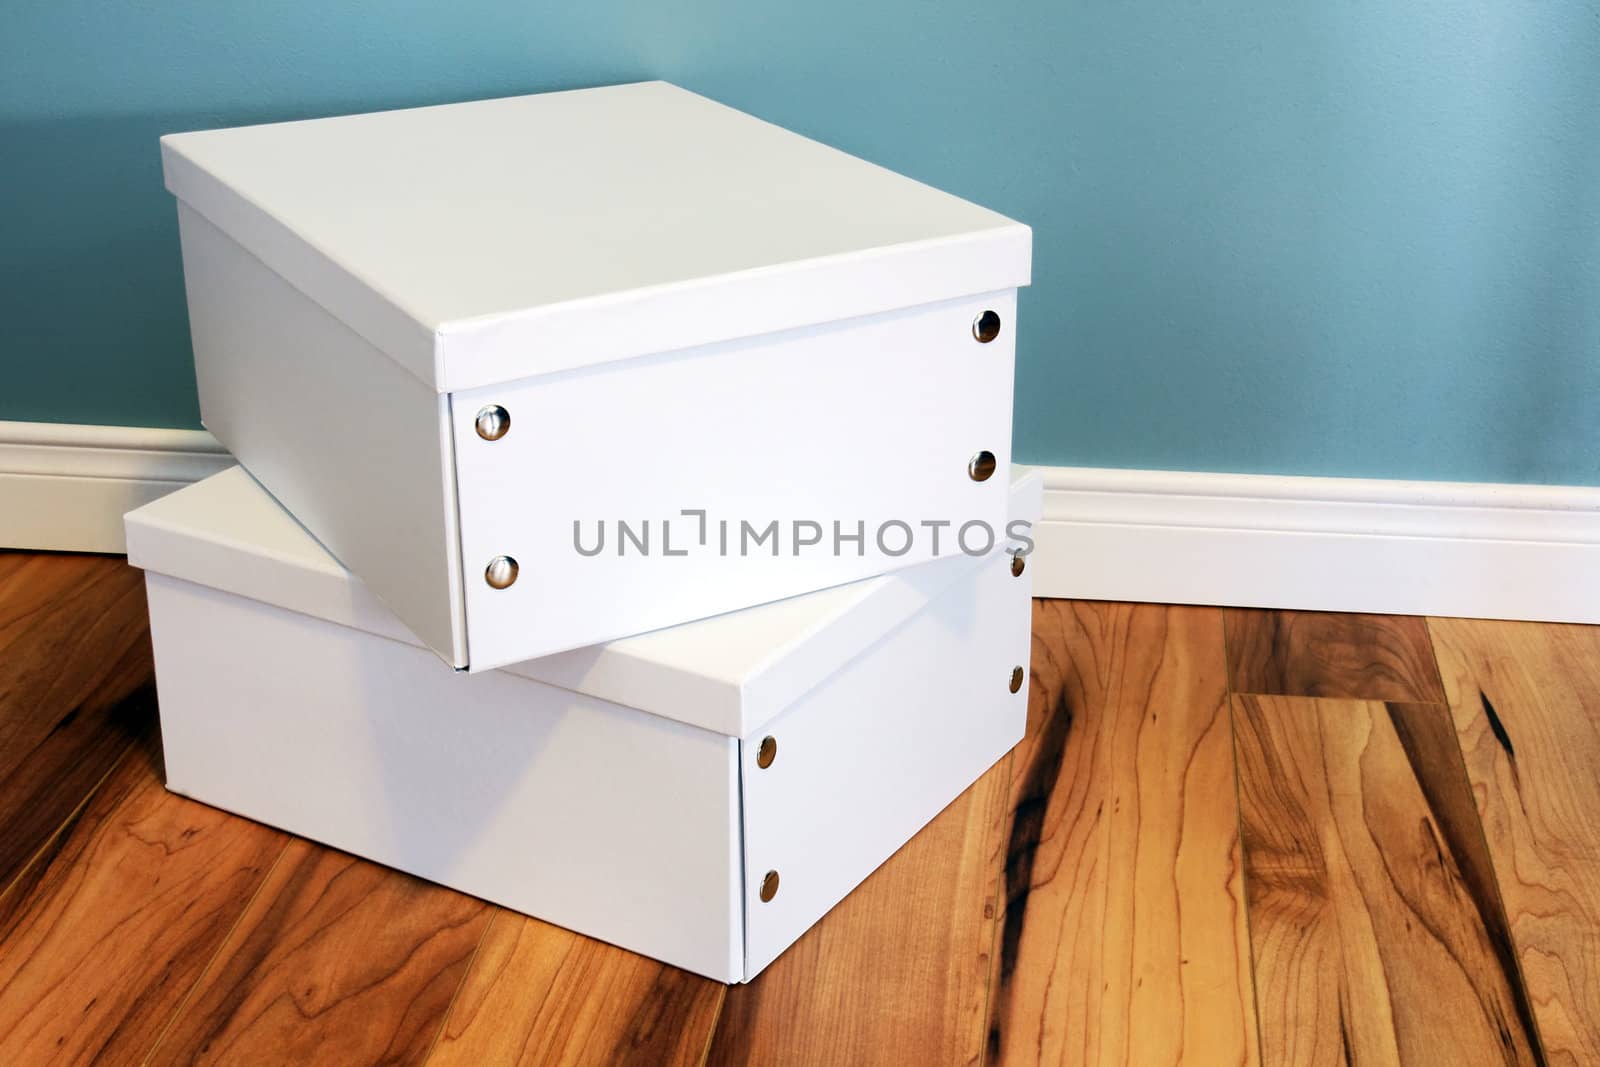 Neat white boxes by Mirage3